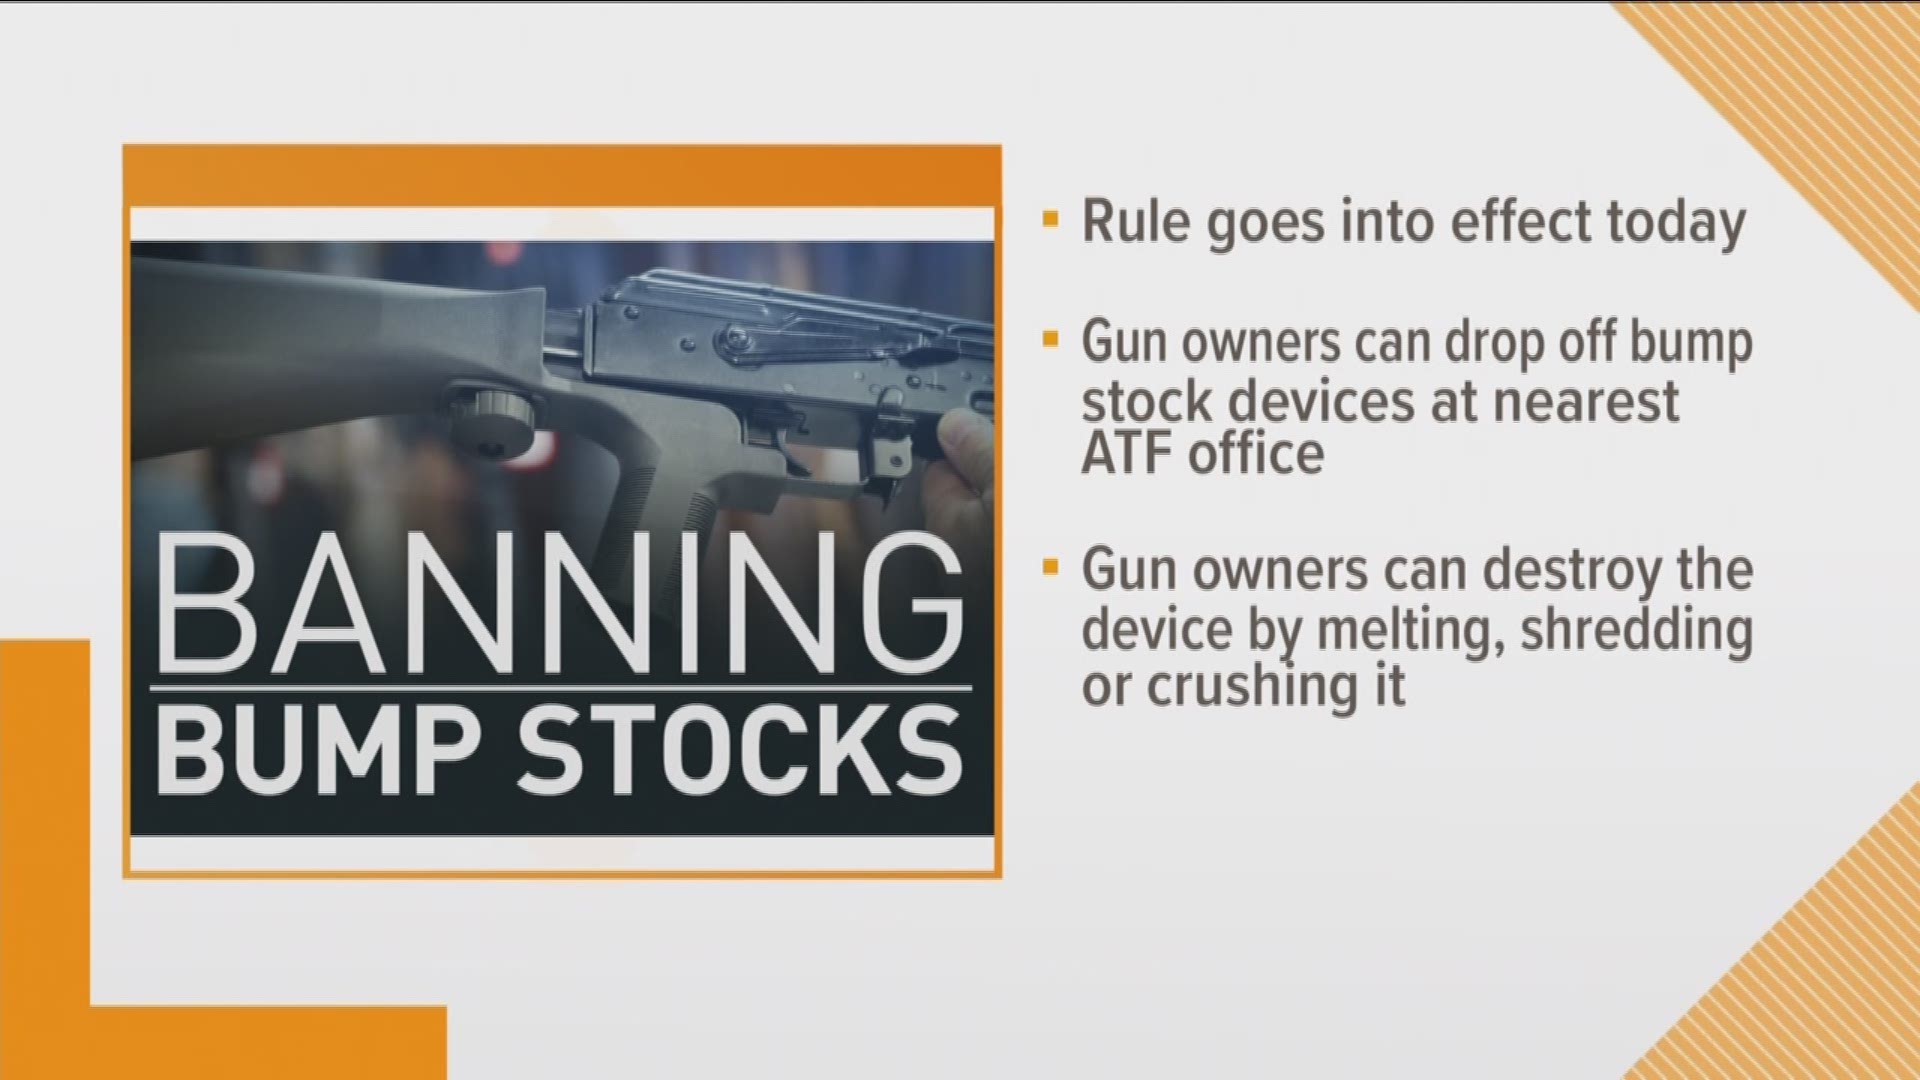 The Justice Department announced Friday that it has started the process to amend federal firearms regulations to clarify that federal law defines bump stocks as machine guns.